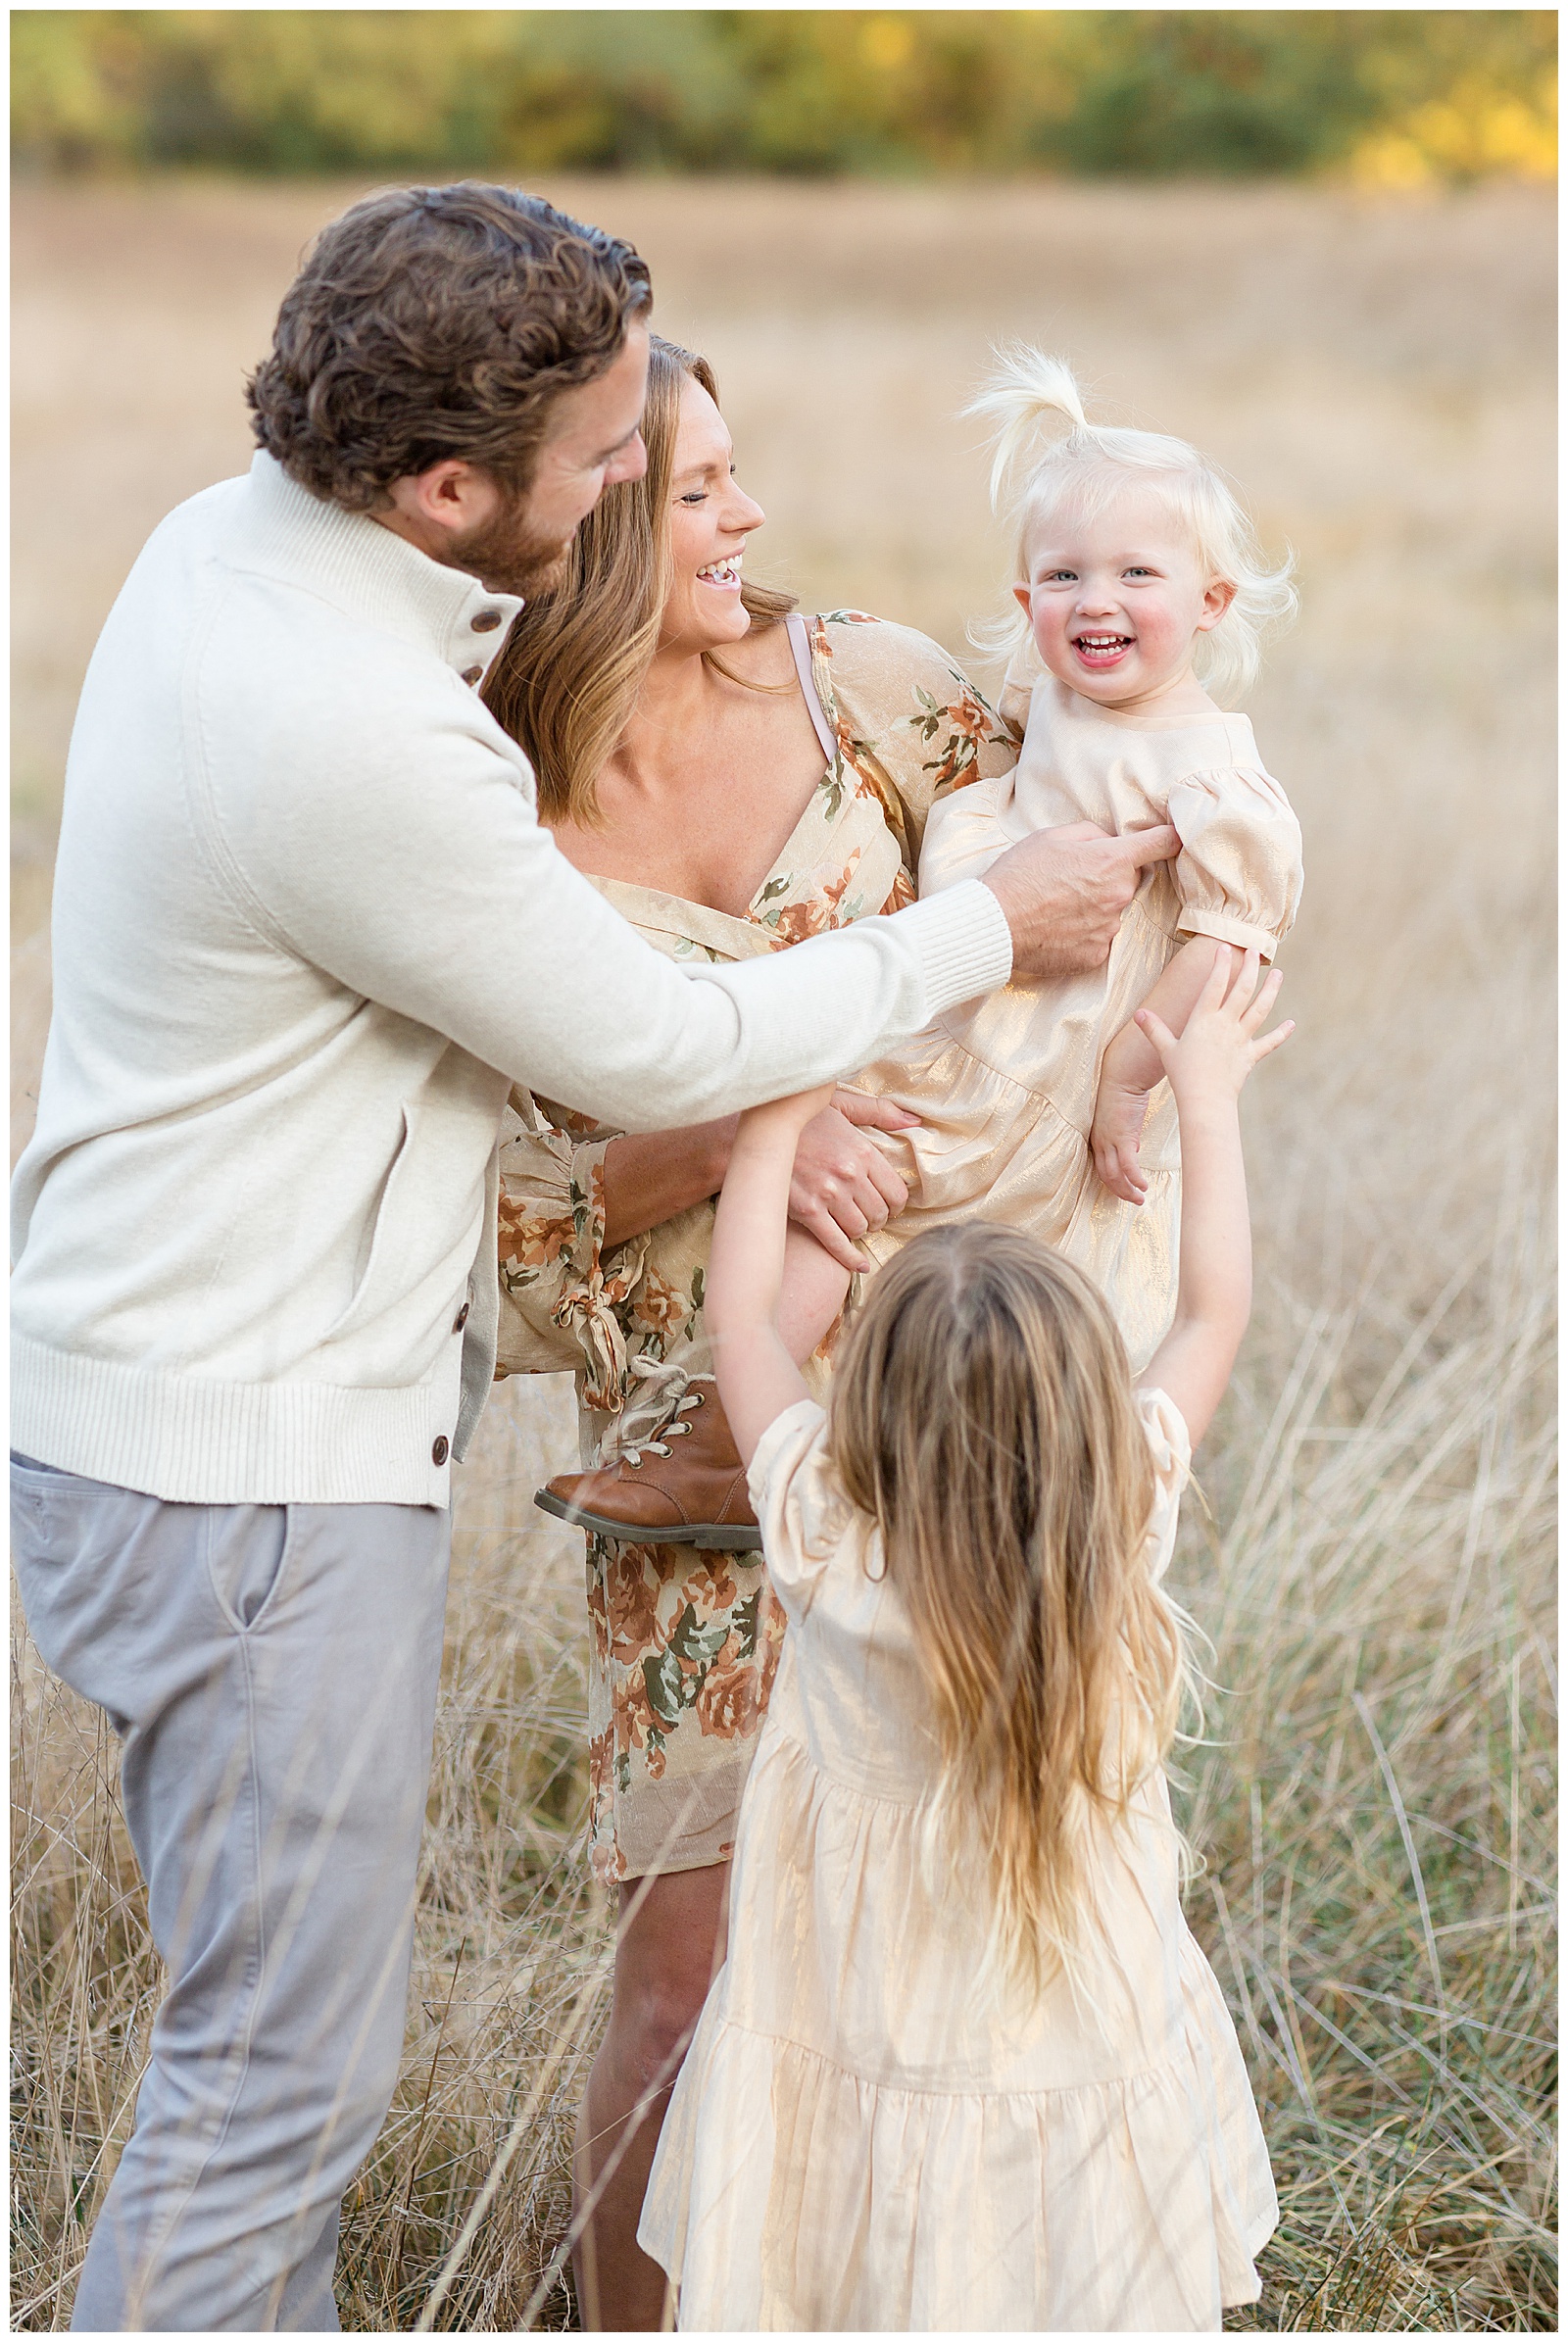 Family of 4 with two young daughters wearing coordinating color outfits of white and cream with mom wearing floral.  Mom holds youngest toddler daughter as big sister and dad all tickle her and she smiles big at the camera.  Click to see more on the blog today!